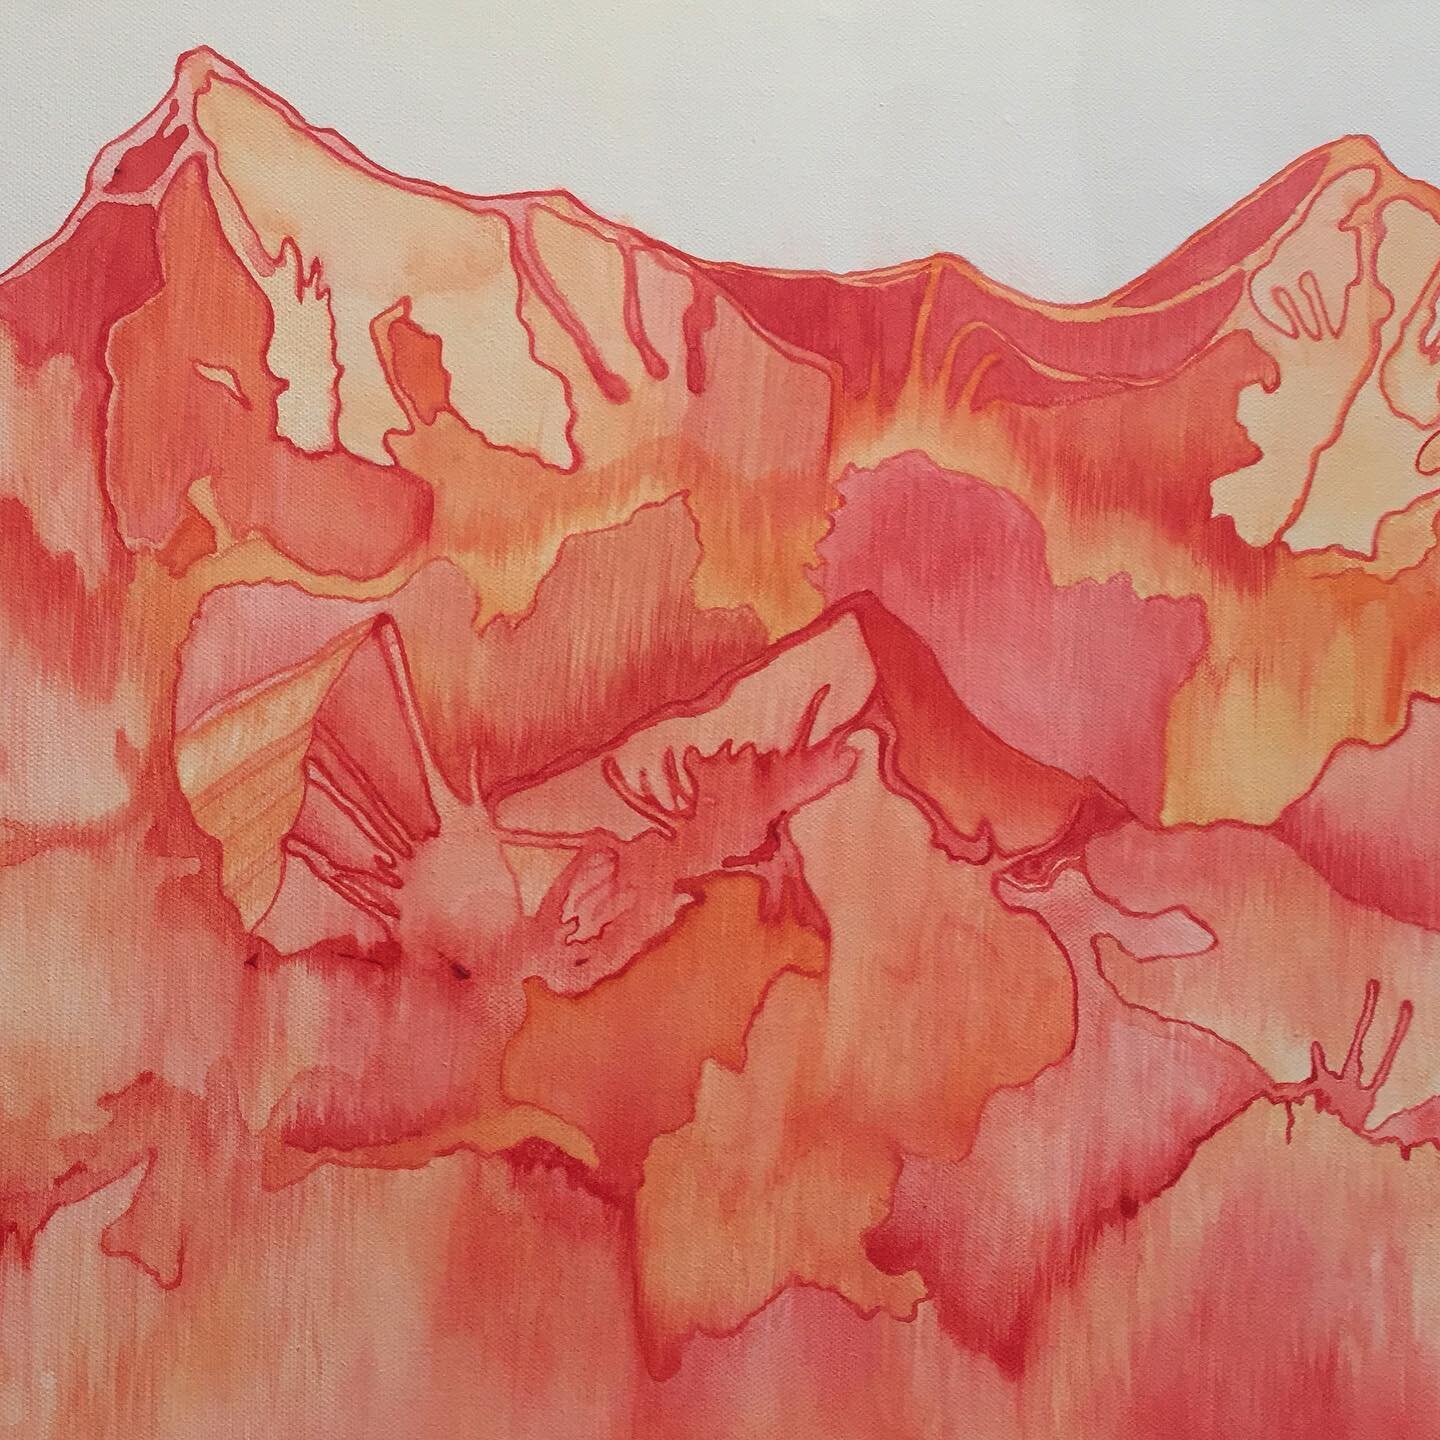 The mountains are calling and I must go &hearts;️
.
.
.
#mountains #art #artist #painting #landscape #landscapepainting #sunset 
#reds #palette #abstract #abstractart #orange #colorful #gouache #artistsoninstagram #sydneyartist #fineart #happyplace #